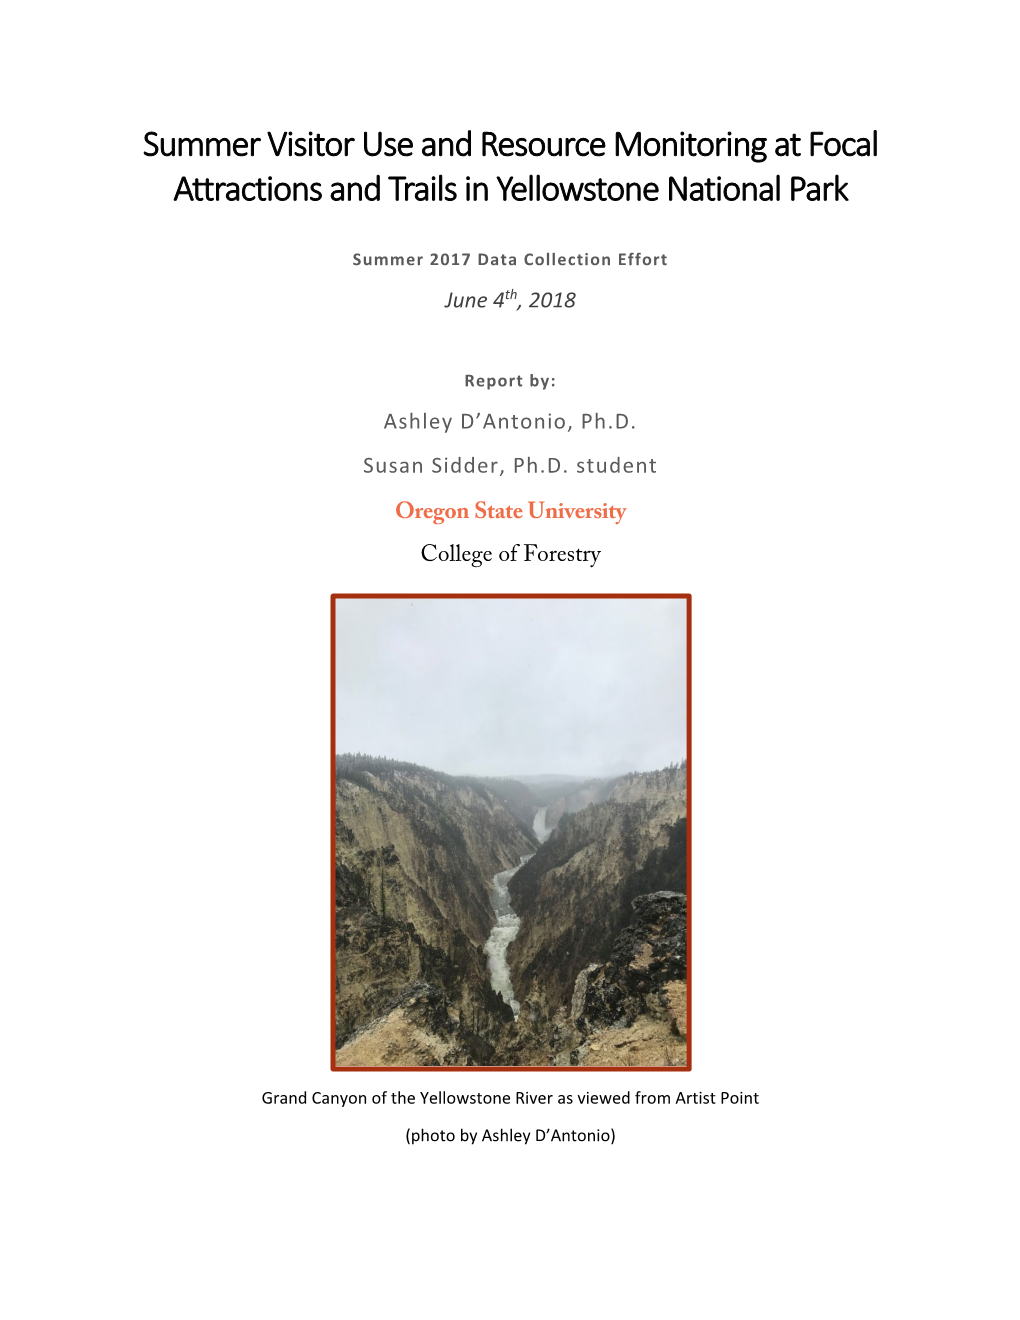 Summer Visitor Use and Resource Monitoring at Focal Attractions and Trails in Yellowstone National Park